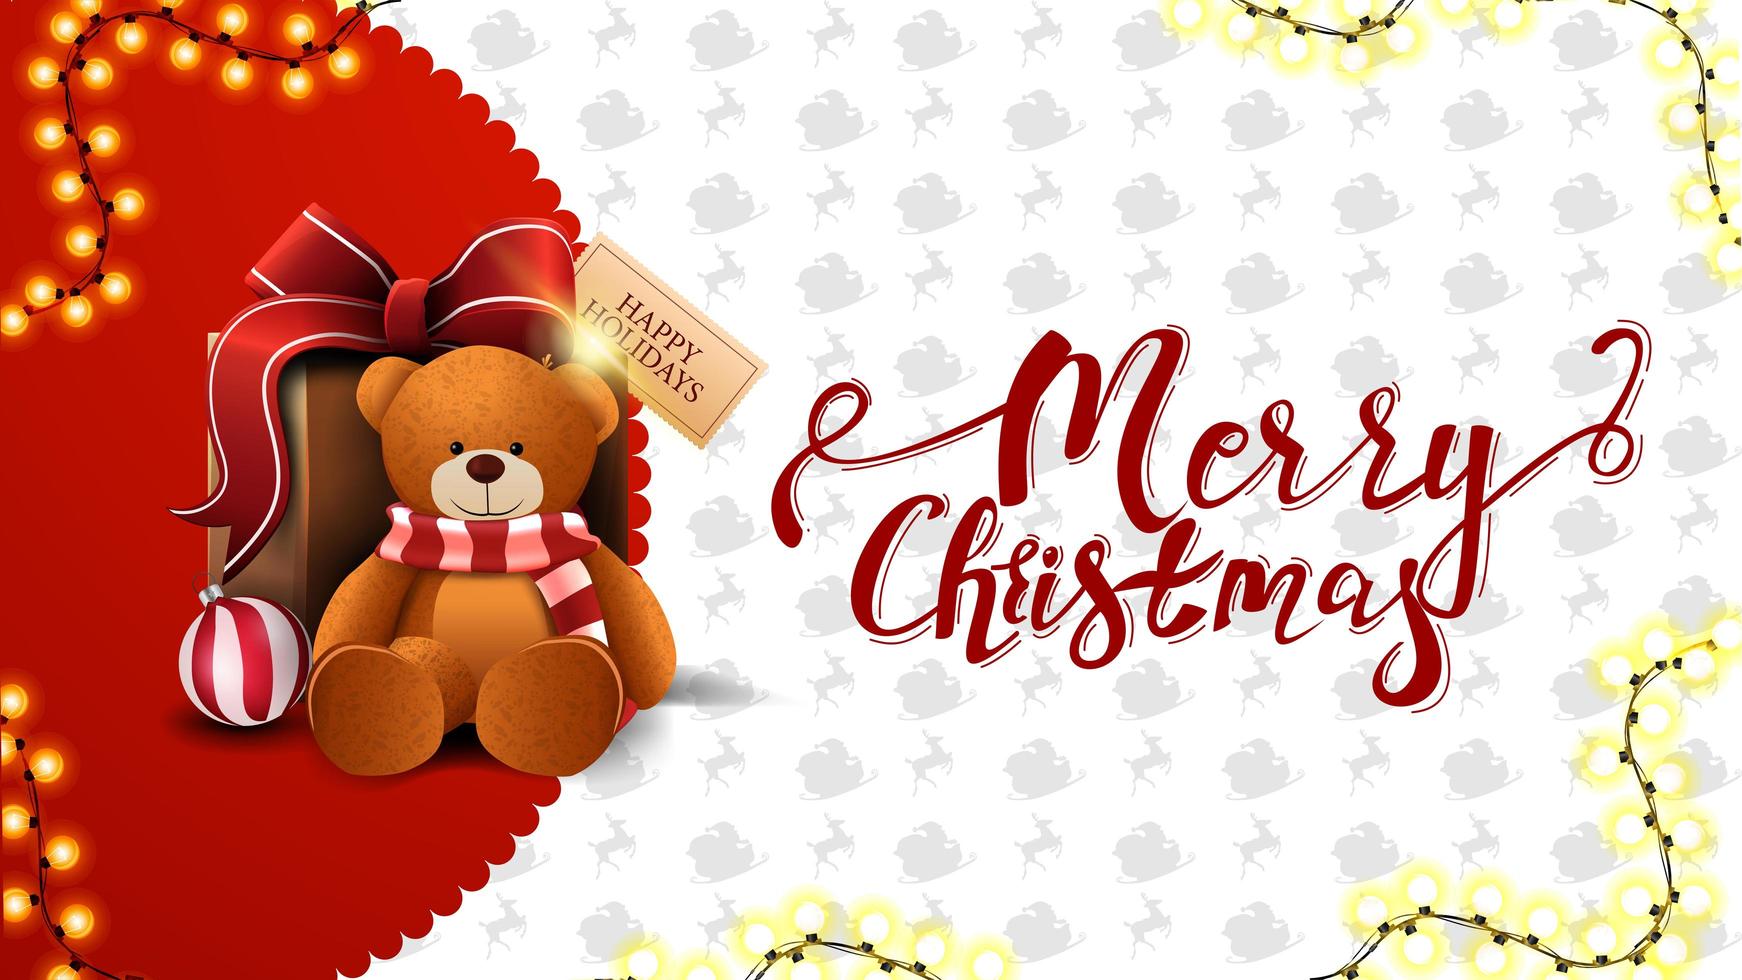 Merry Christmas, red and white greeting card with garland and present with Teddy Bear vector